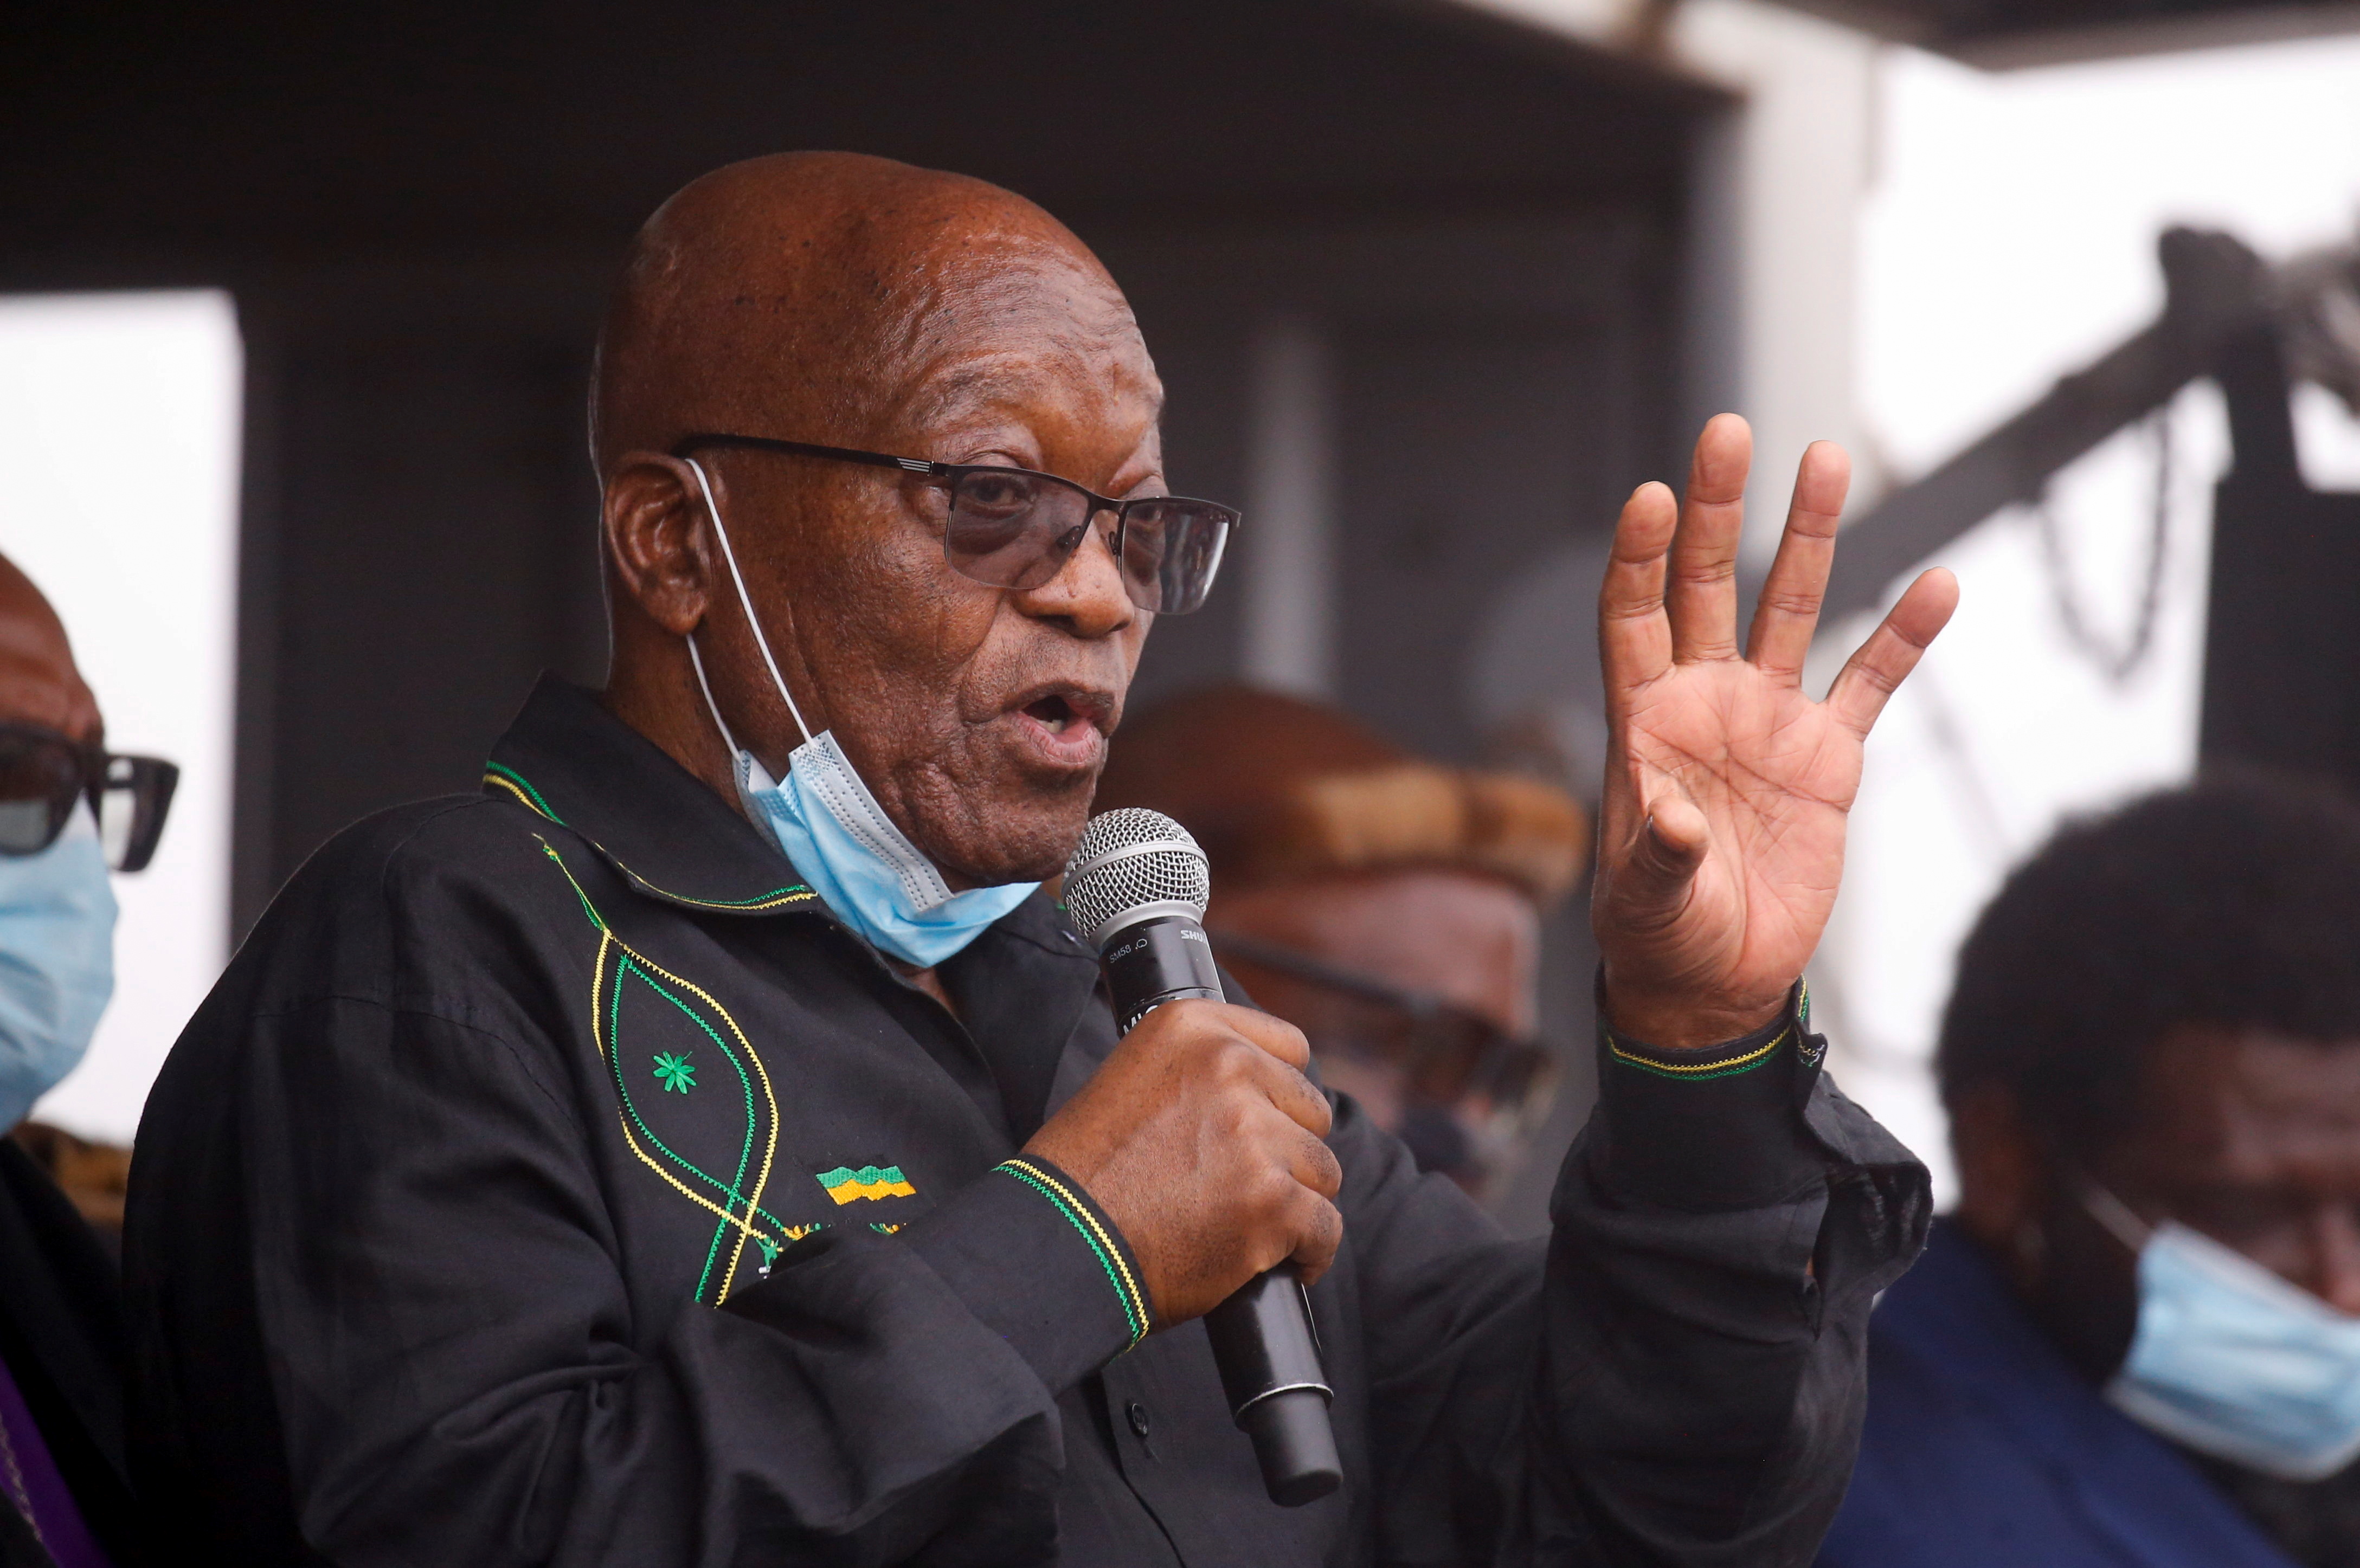 Former South African president Jacob Zuma speaks to supporters who gathered at his home in Nkandla